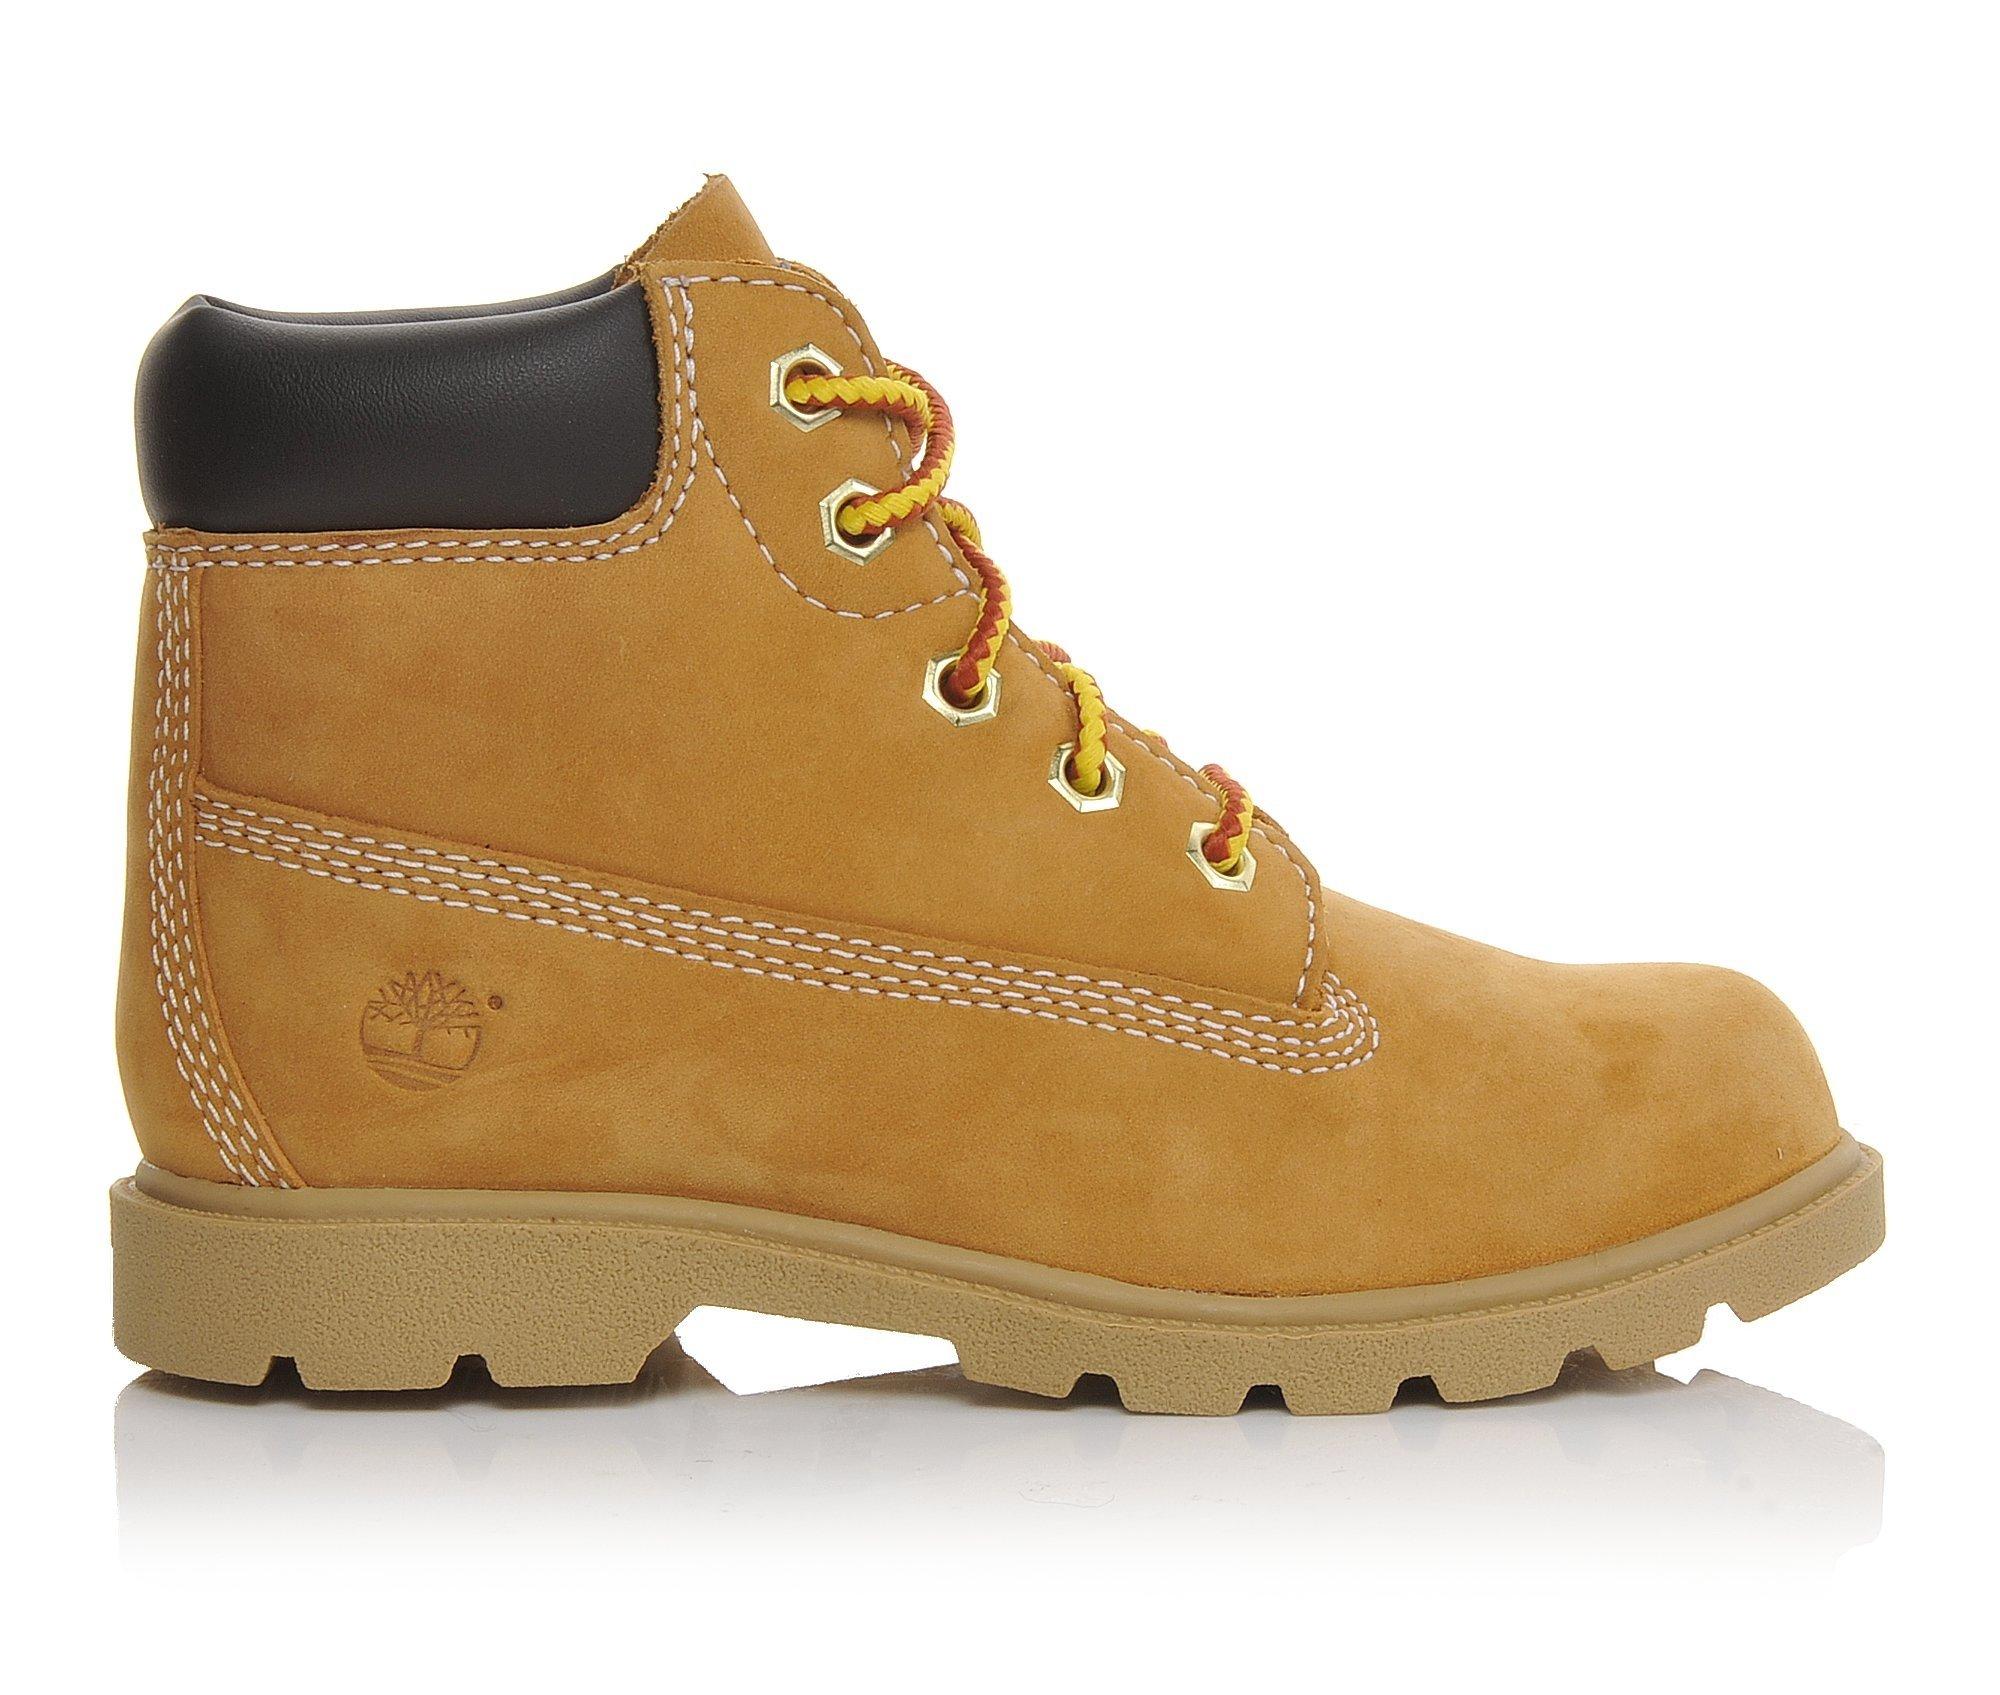 Timberland Boots & Shoes | Carnival